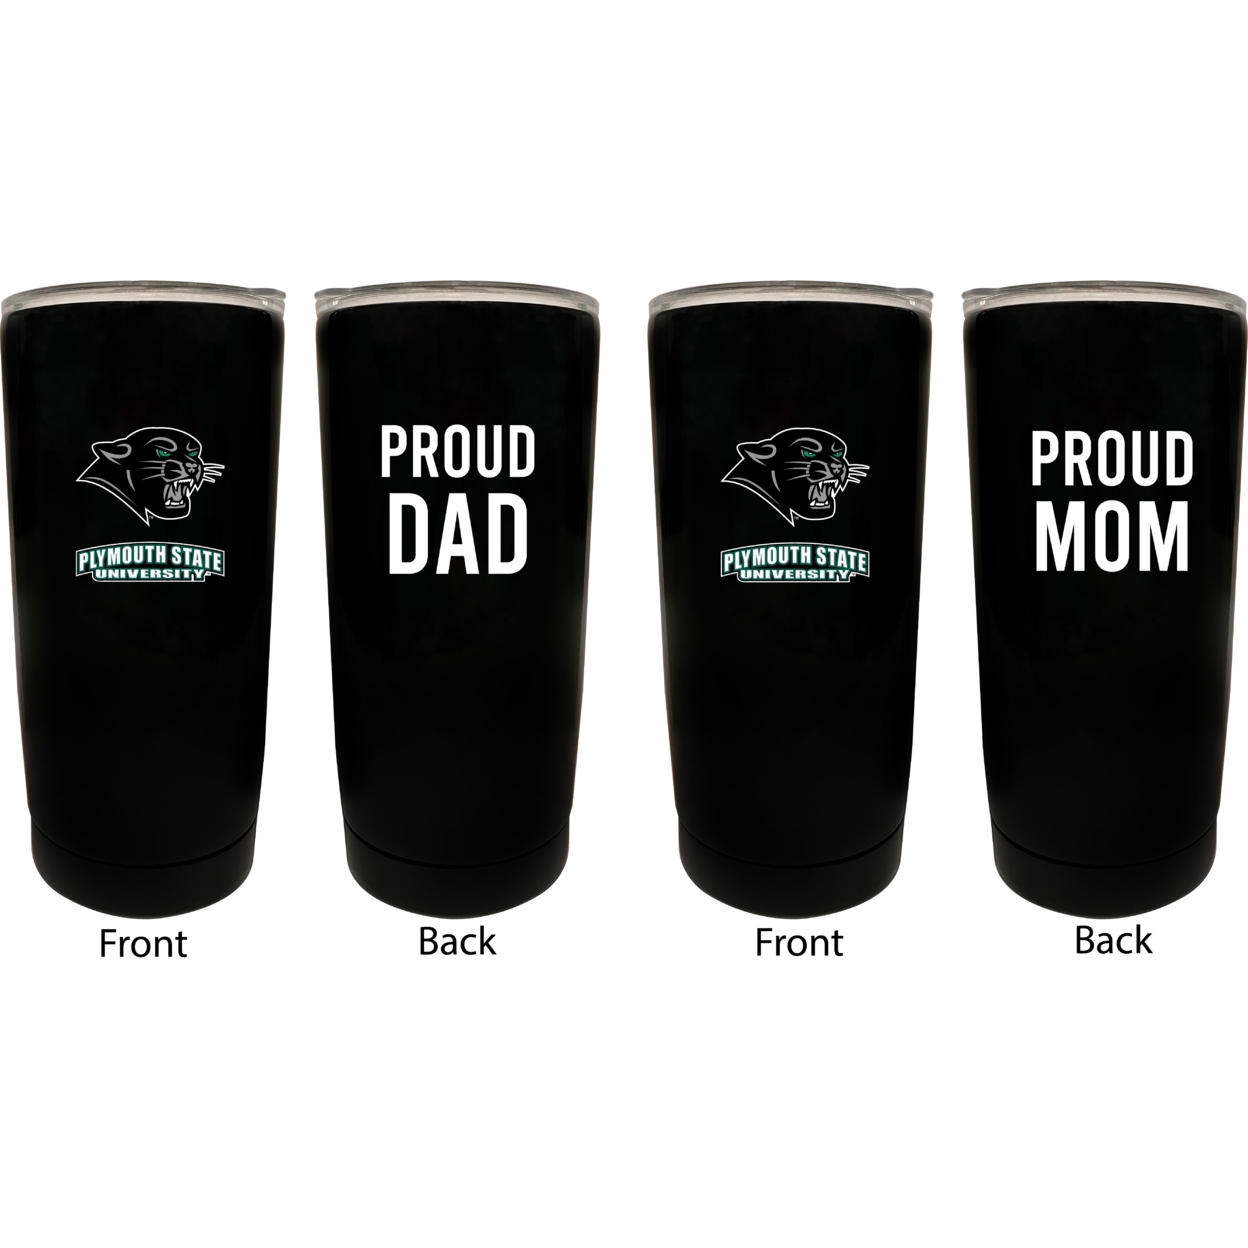 Plymouth State University Proud Mom And Dad 16 Oz Insulated Stainless Steel Tumblers 2 Pack Black.